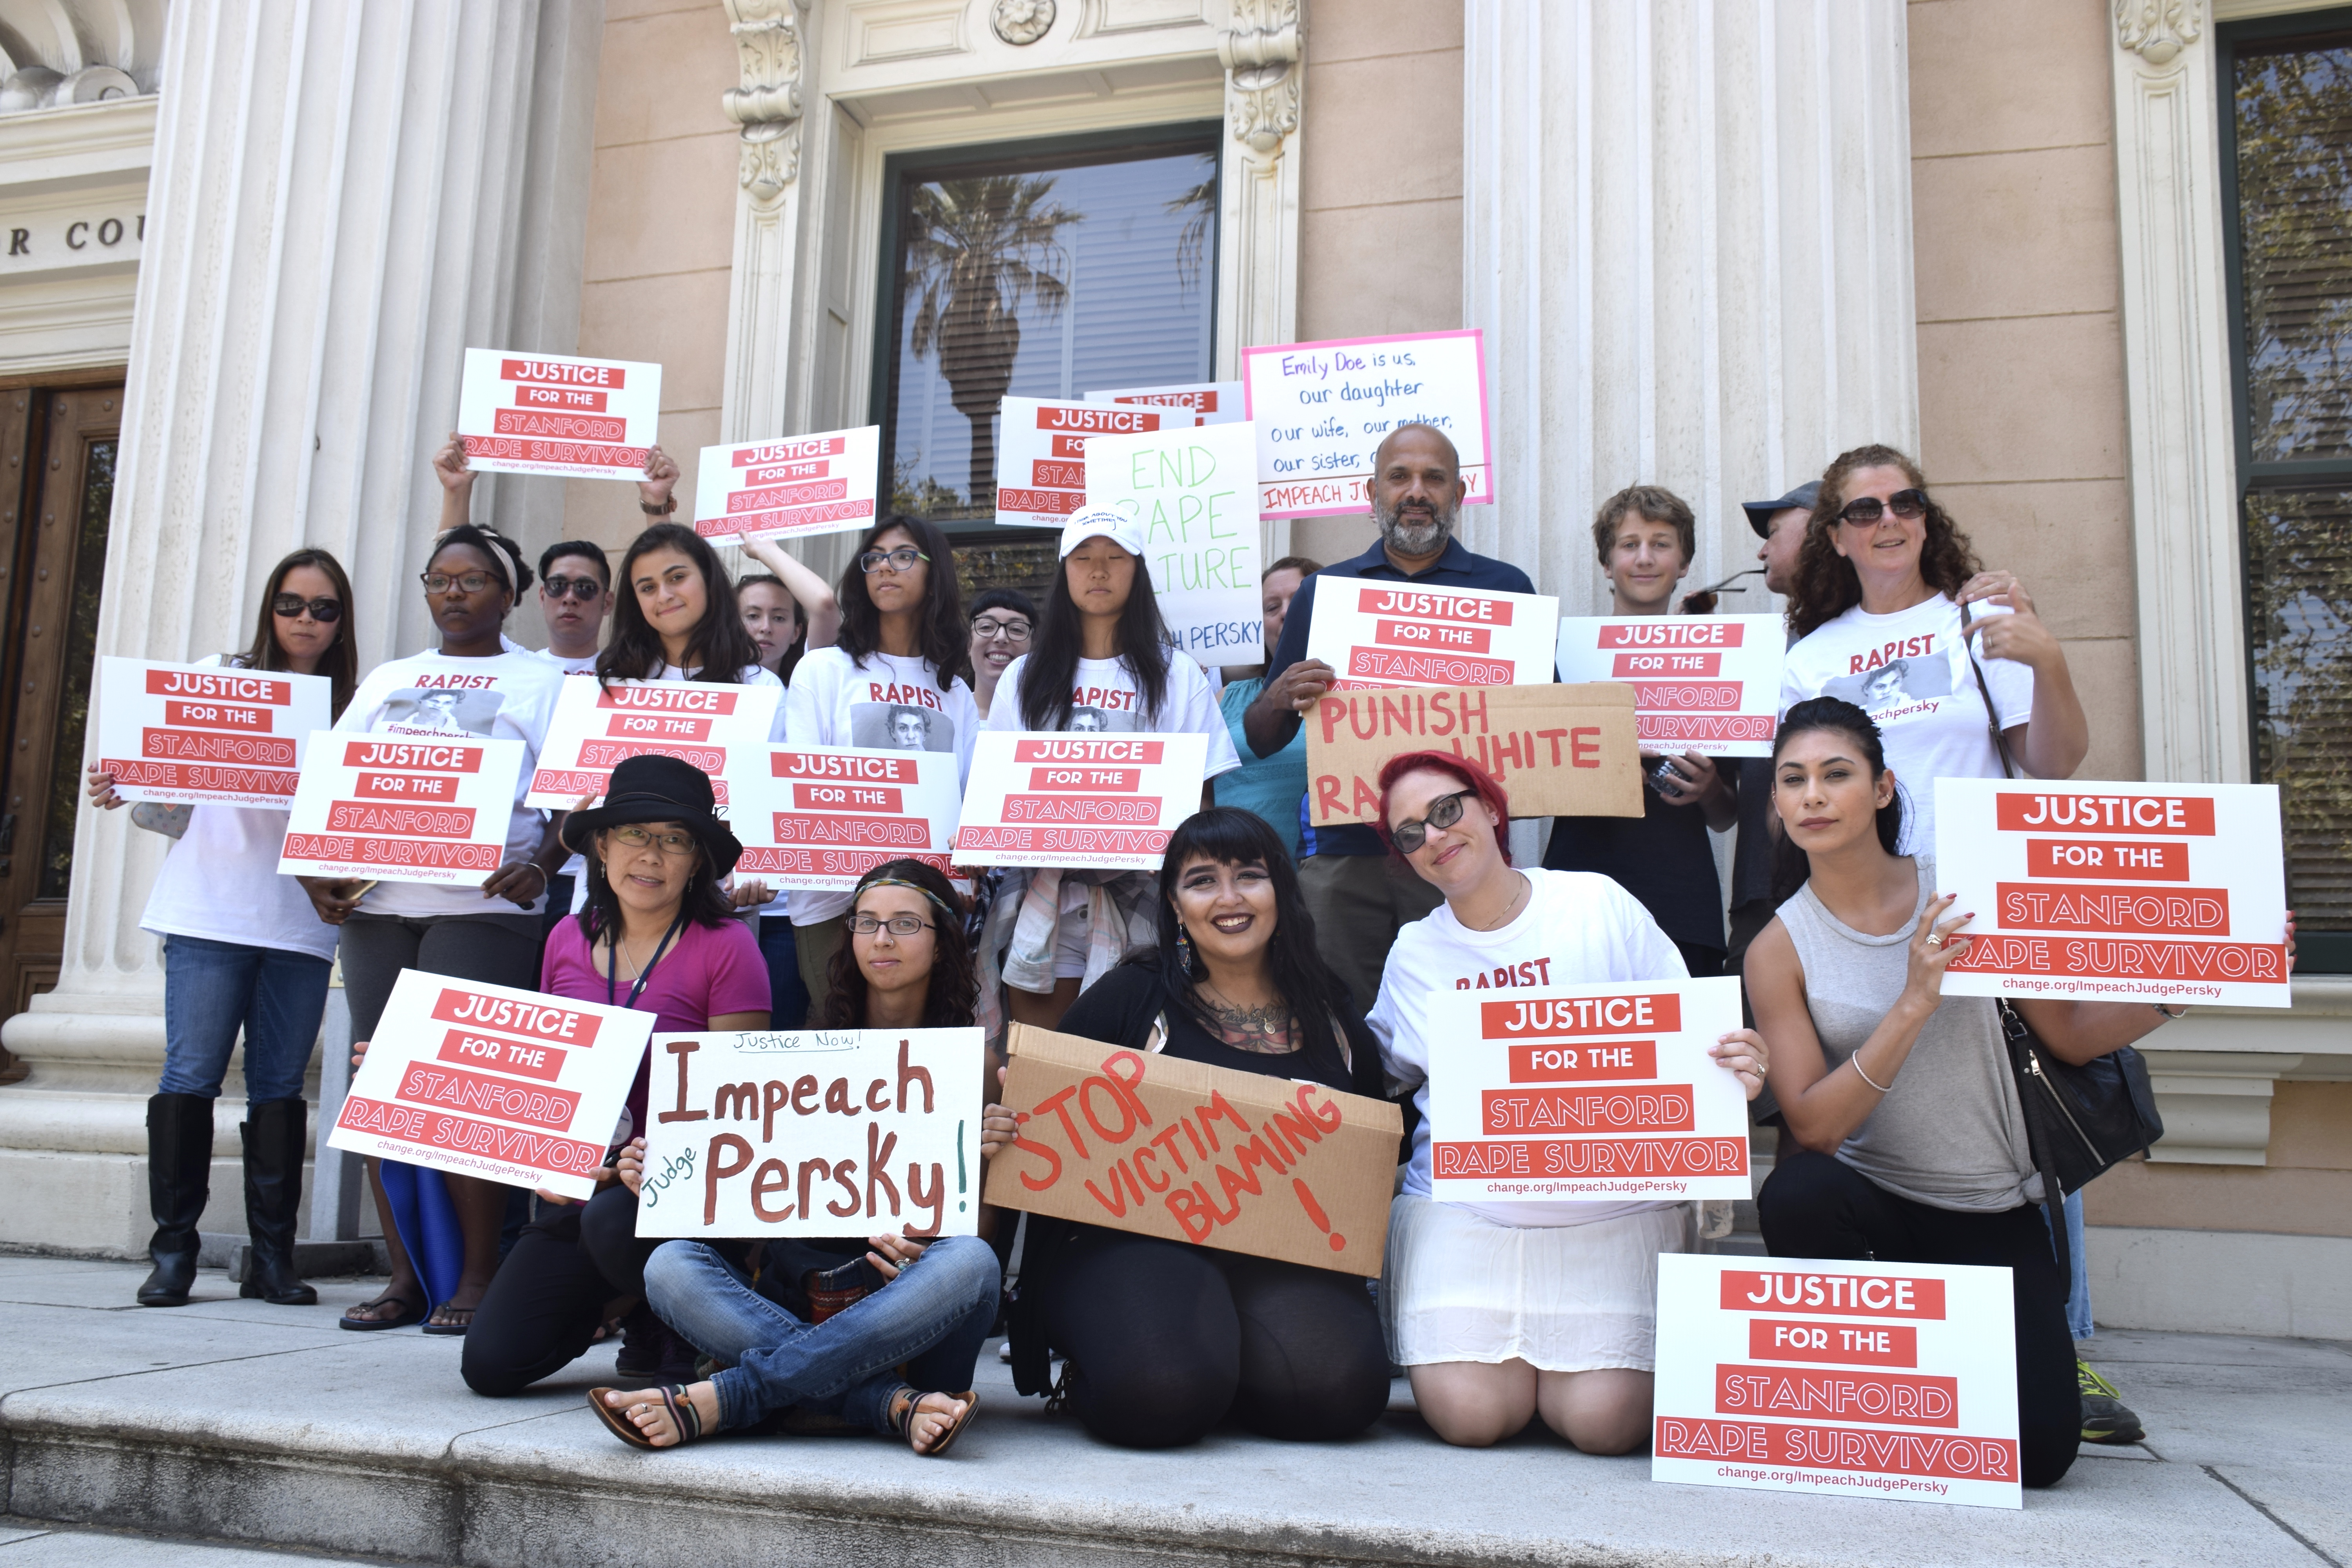 With support from our campaigns team, a group of young activists delivered over 1 million signatures calling on California’s judicial system to deliver justice to survivors of sexual assault.